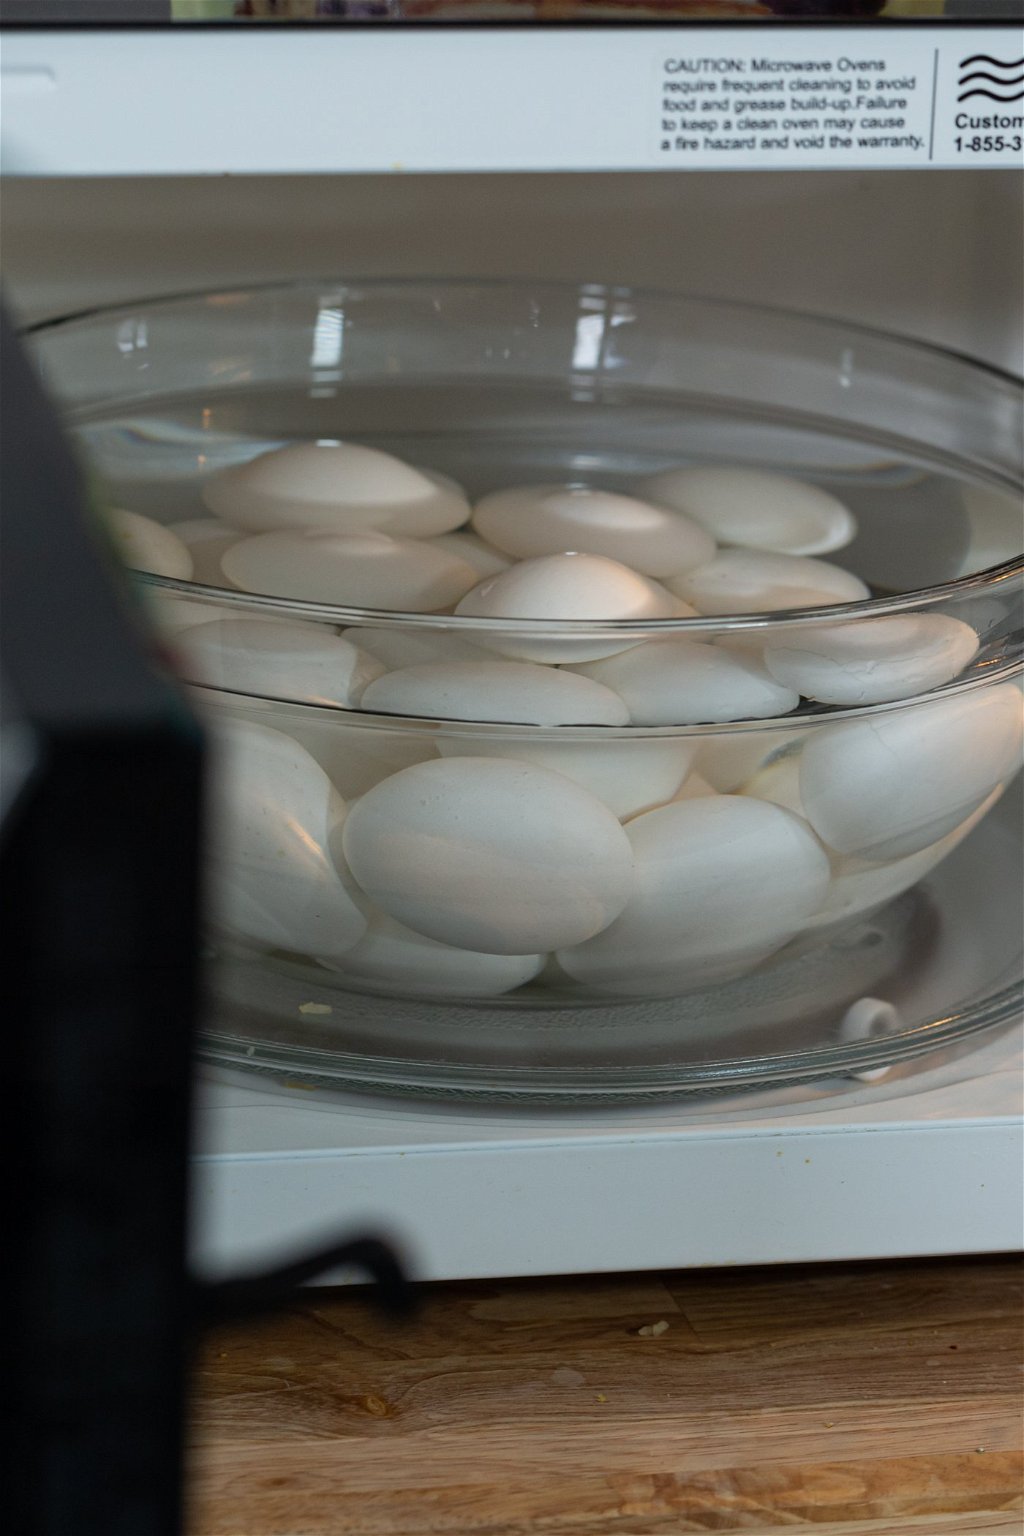 How To Make Perfect Hard Boiled Eggs 4 Easy Ways The Protein Chef